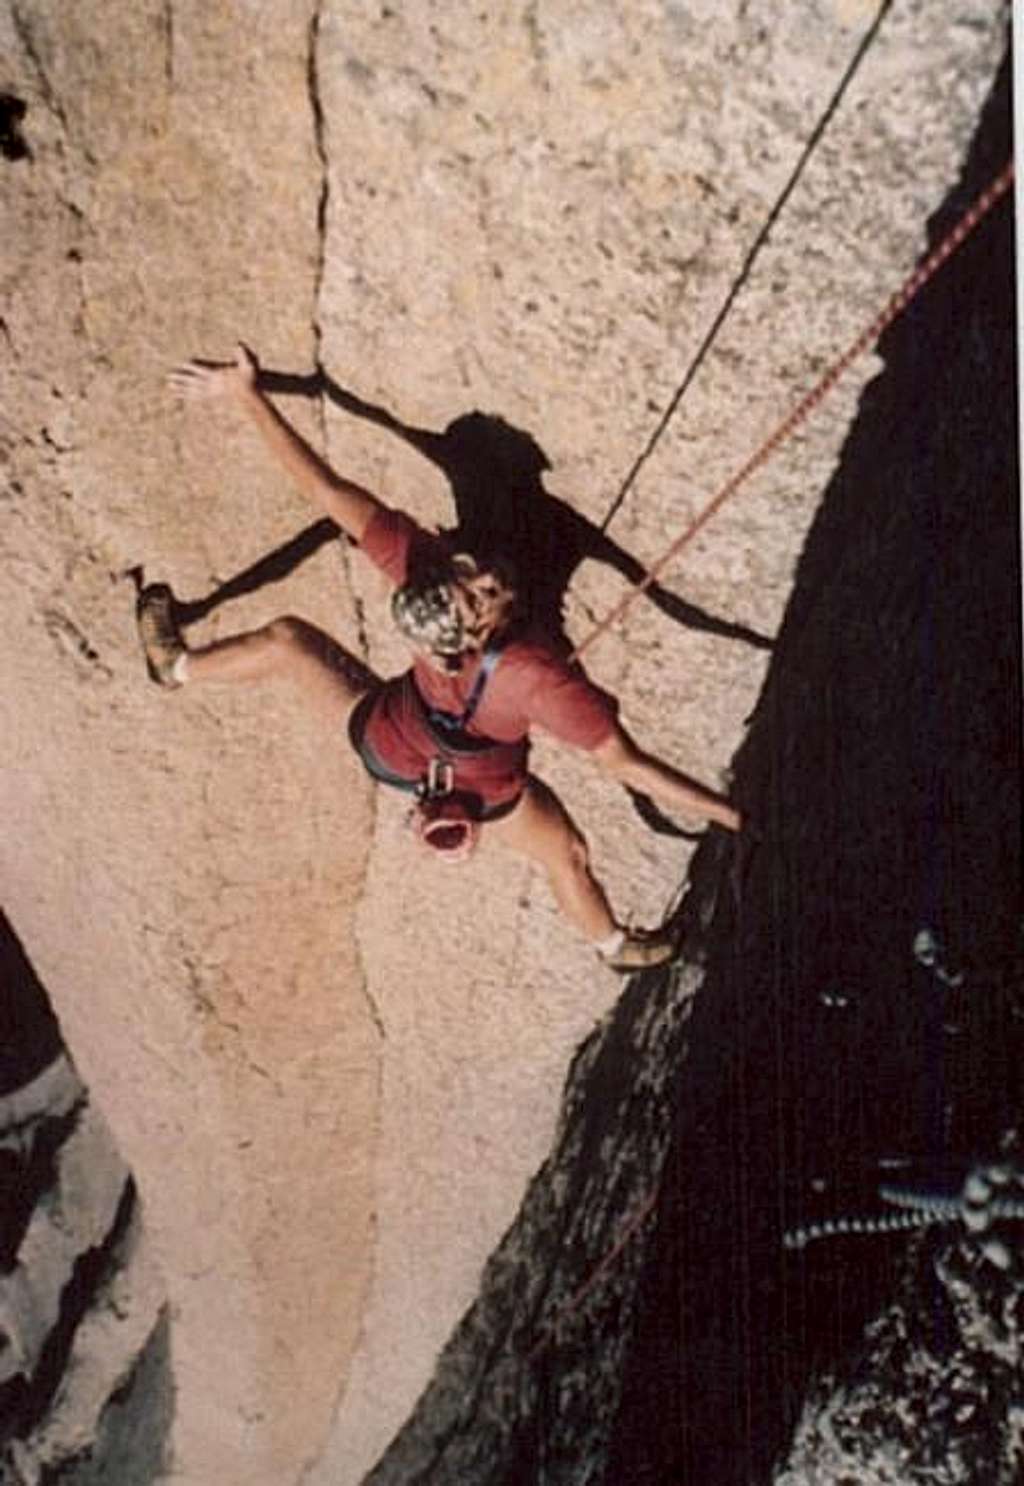 Frank Sanders on the 2nd Pitch of Psychic Turbulence. Devils Tower, Wyoming.